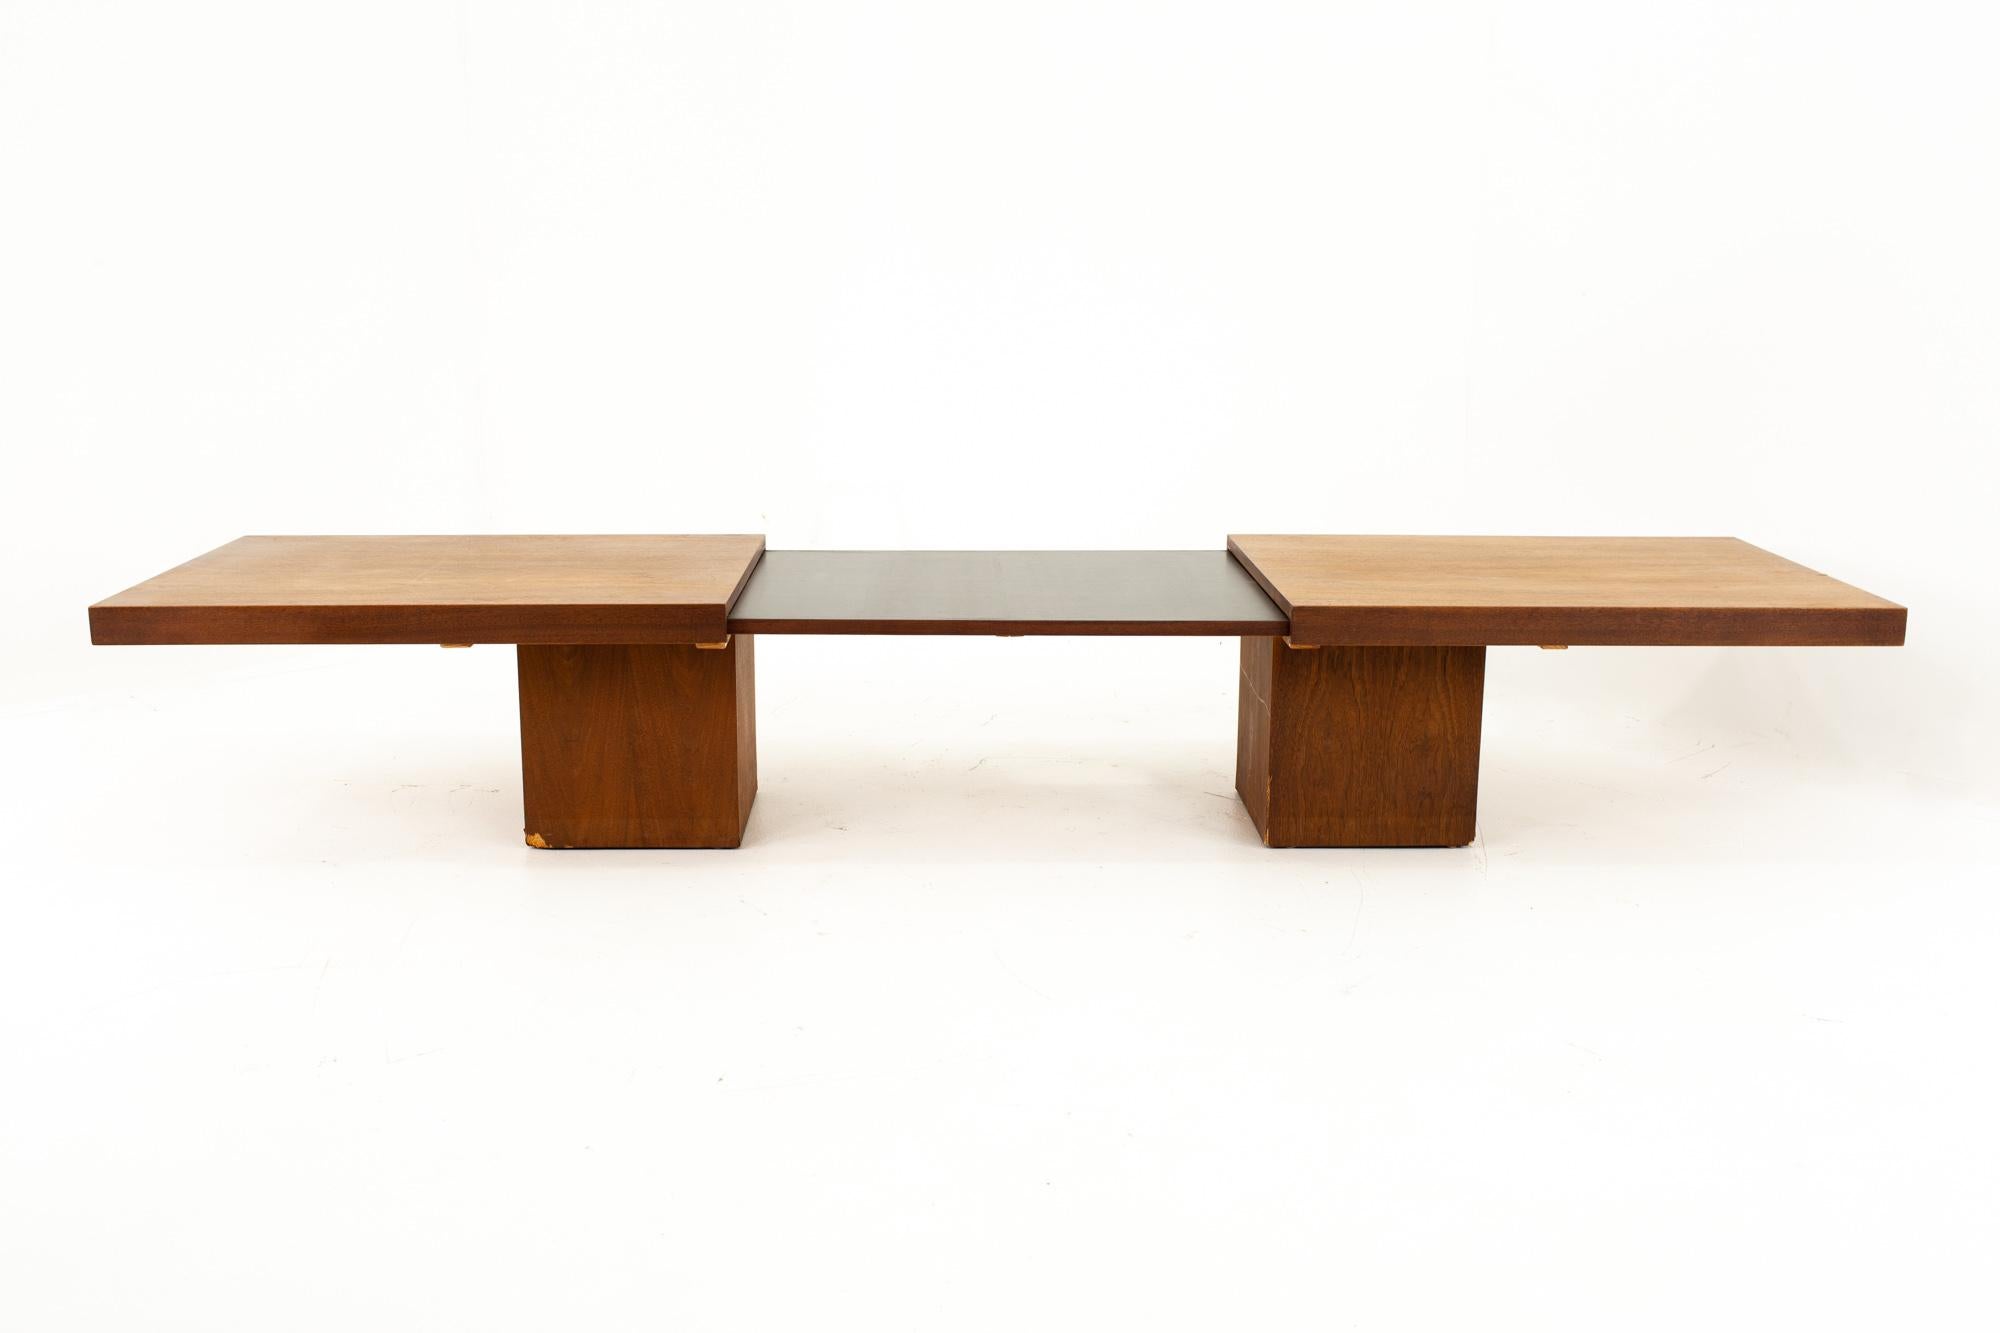 John Keal for Brown Saltman Mid Century expanding coffee table
Table measures: 66 wide x 24 deep x 15 high 
When expanded table measures: 95.5 wide x 24 deep x 15 high

This price includes getting this piece in what we call restored vintage